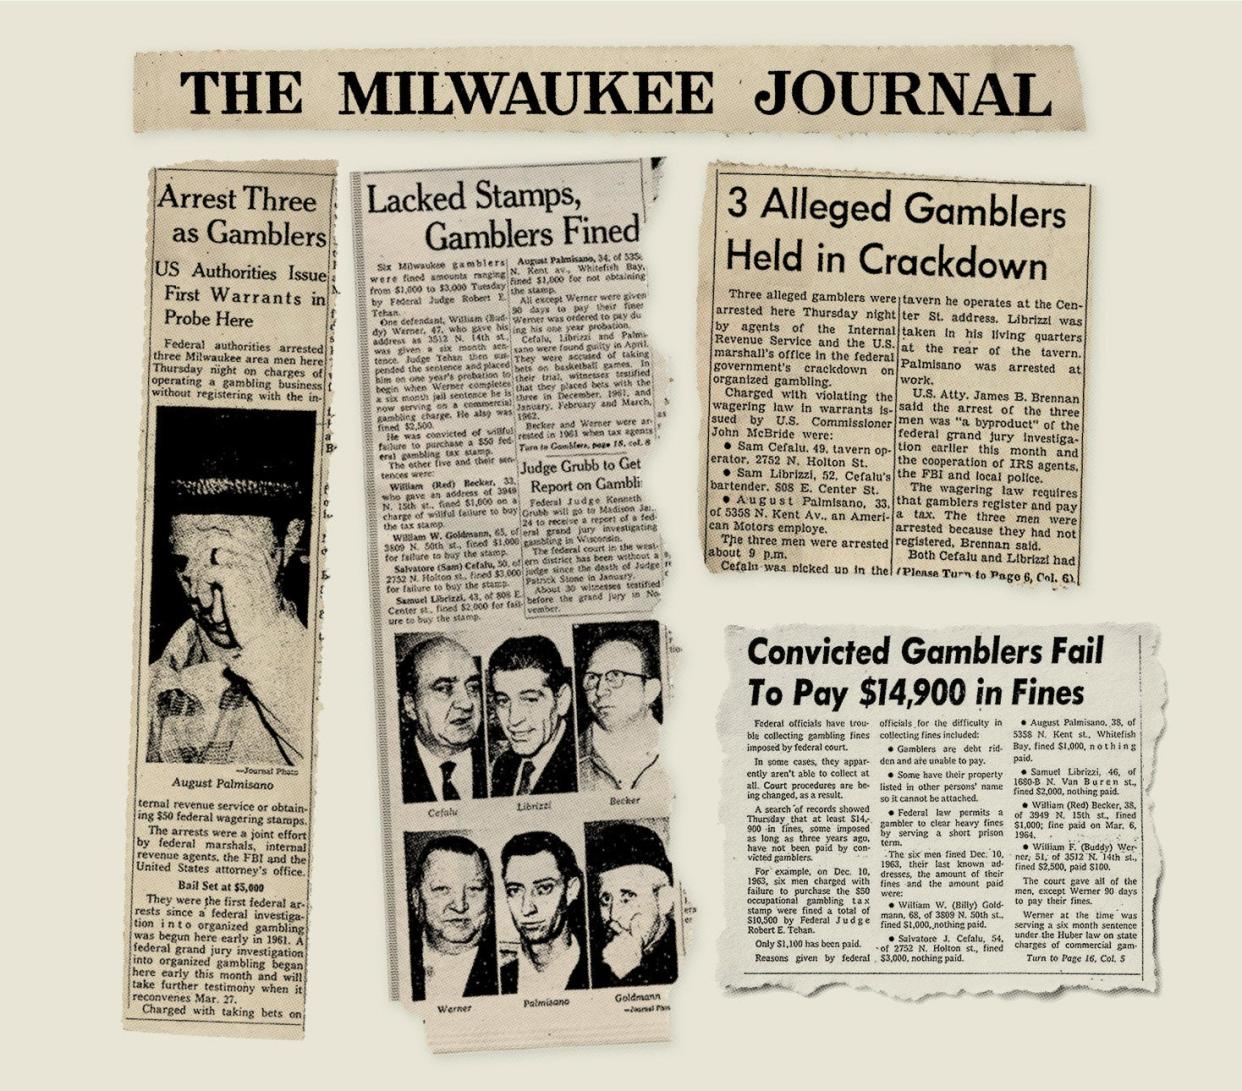 Newspaper clippings from Augie’s early gambling charges in the 1960s.